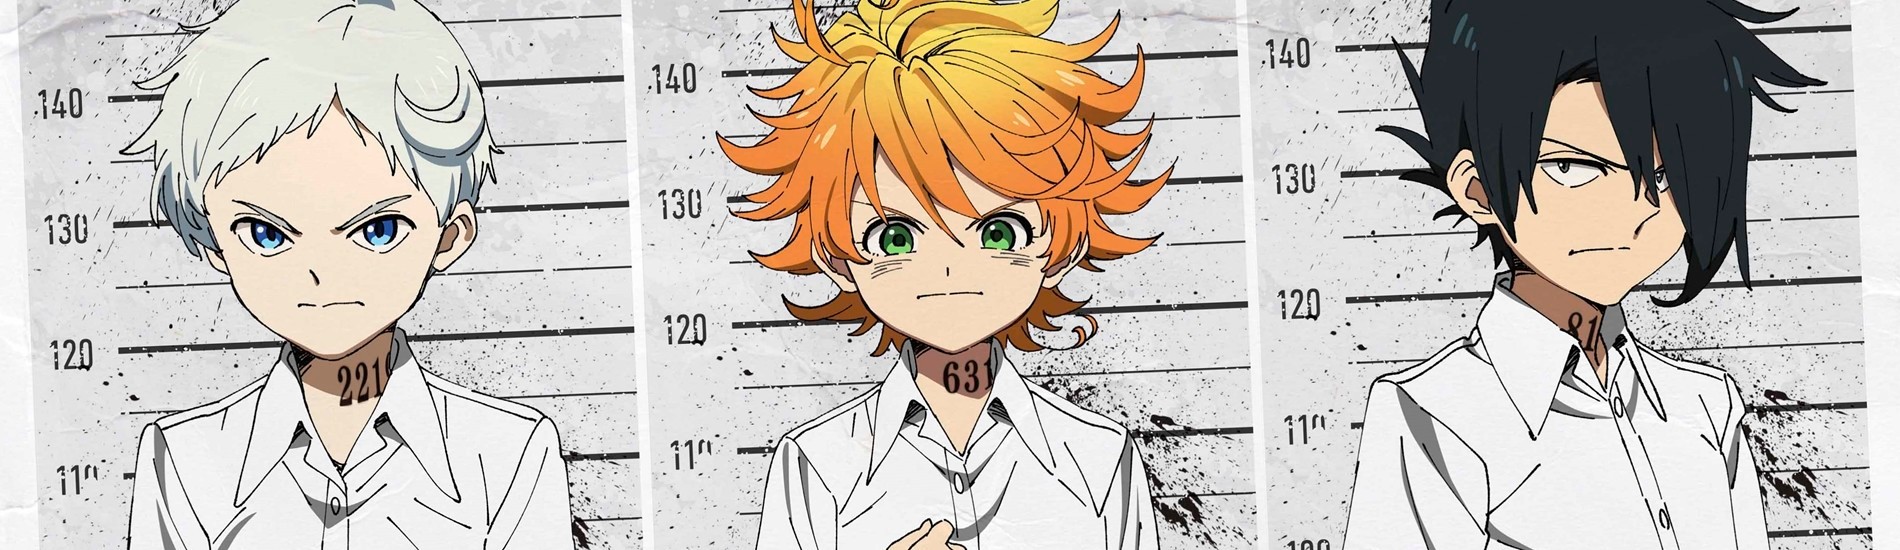 The Promised Neverland: A Horrifying Premise, a Fantastic Follow